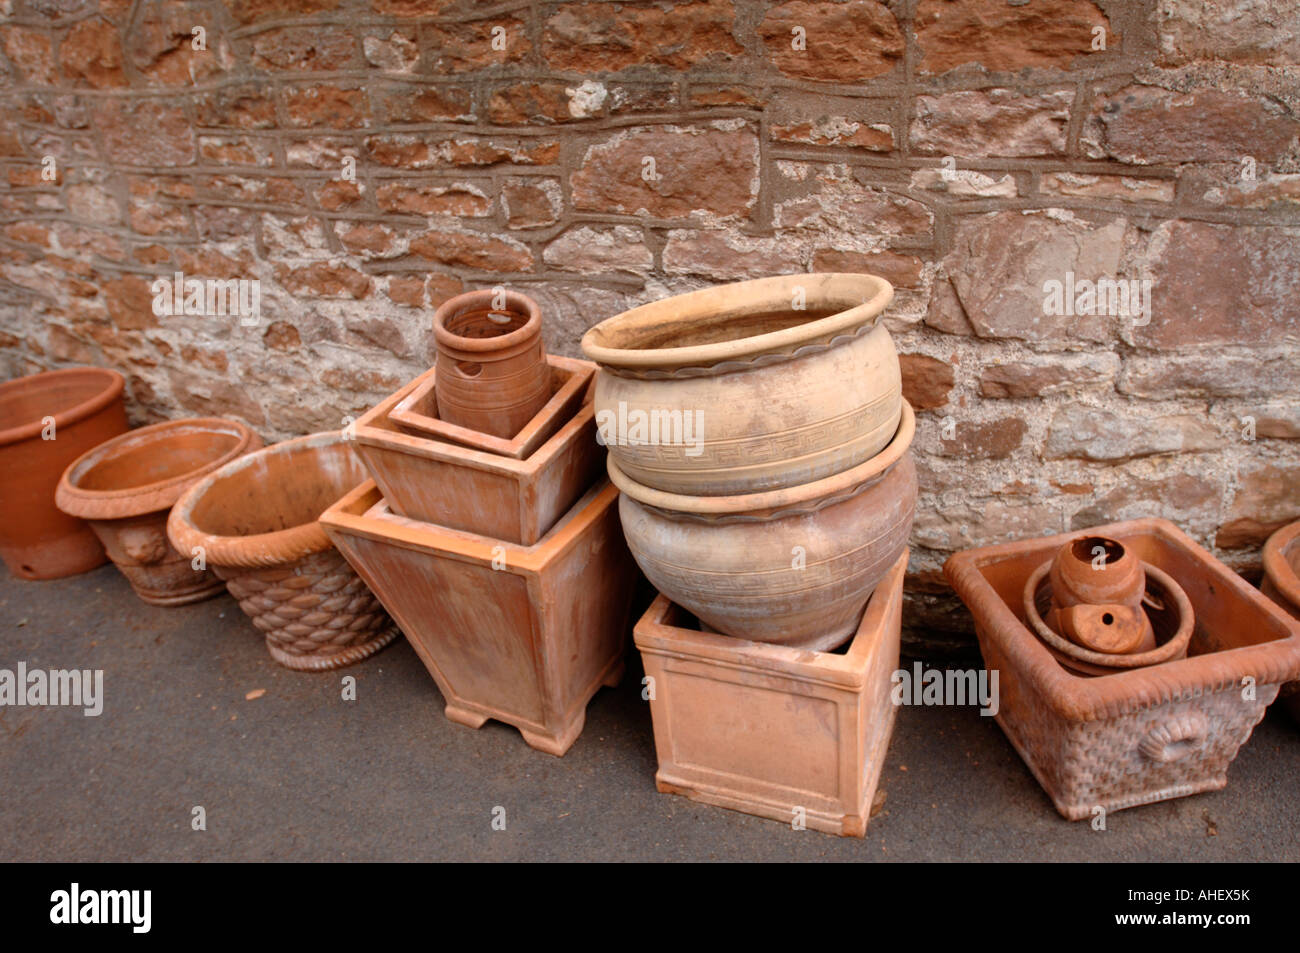 A SELECTION OF TERRACOTTA POTS Stock Photo